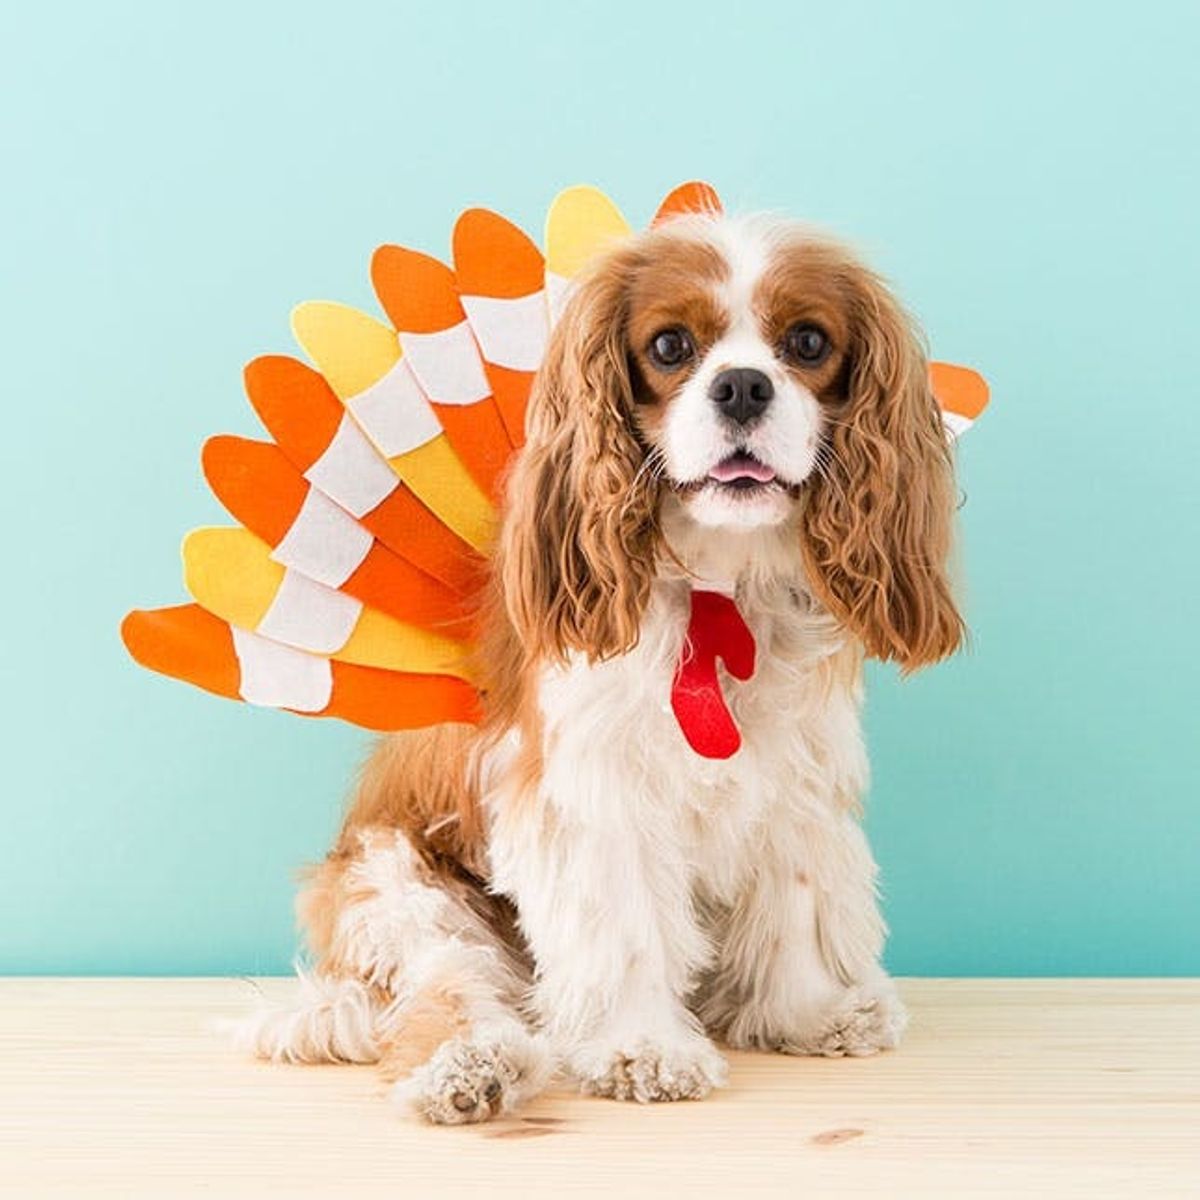 How to Dress Your Dog as a Turkey This Halloween